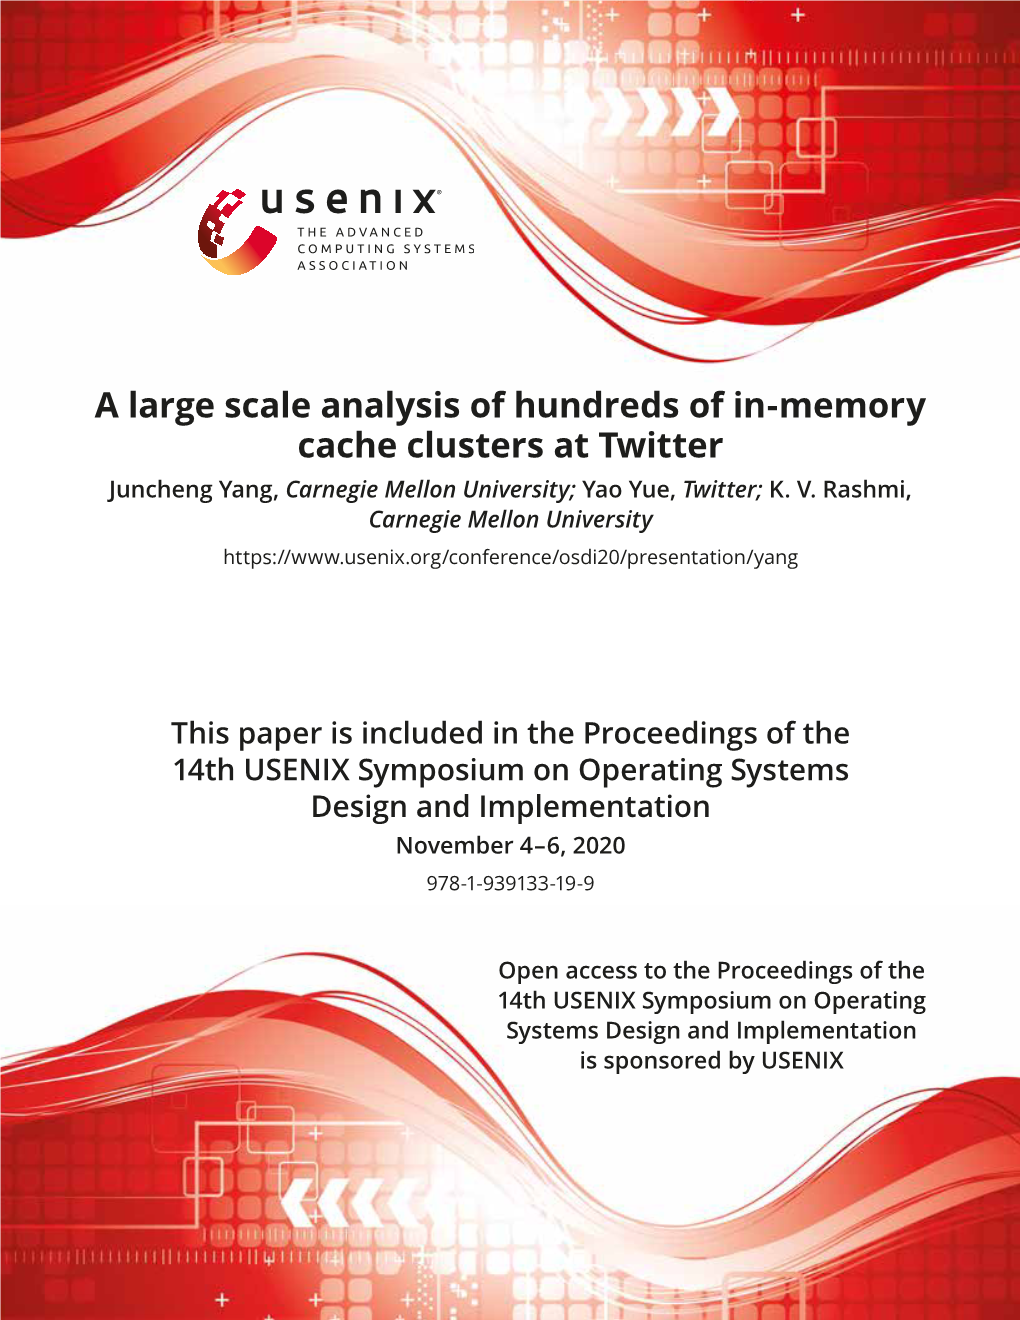 A Large Scale Analysis of Hundreds of In-Memory Cache Clusters at Twitter Juncheng Yang, Carnegie Mellon University; Yao Yue, Twitter; K